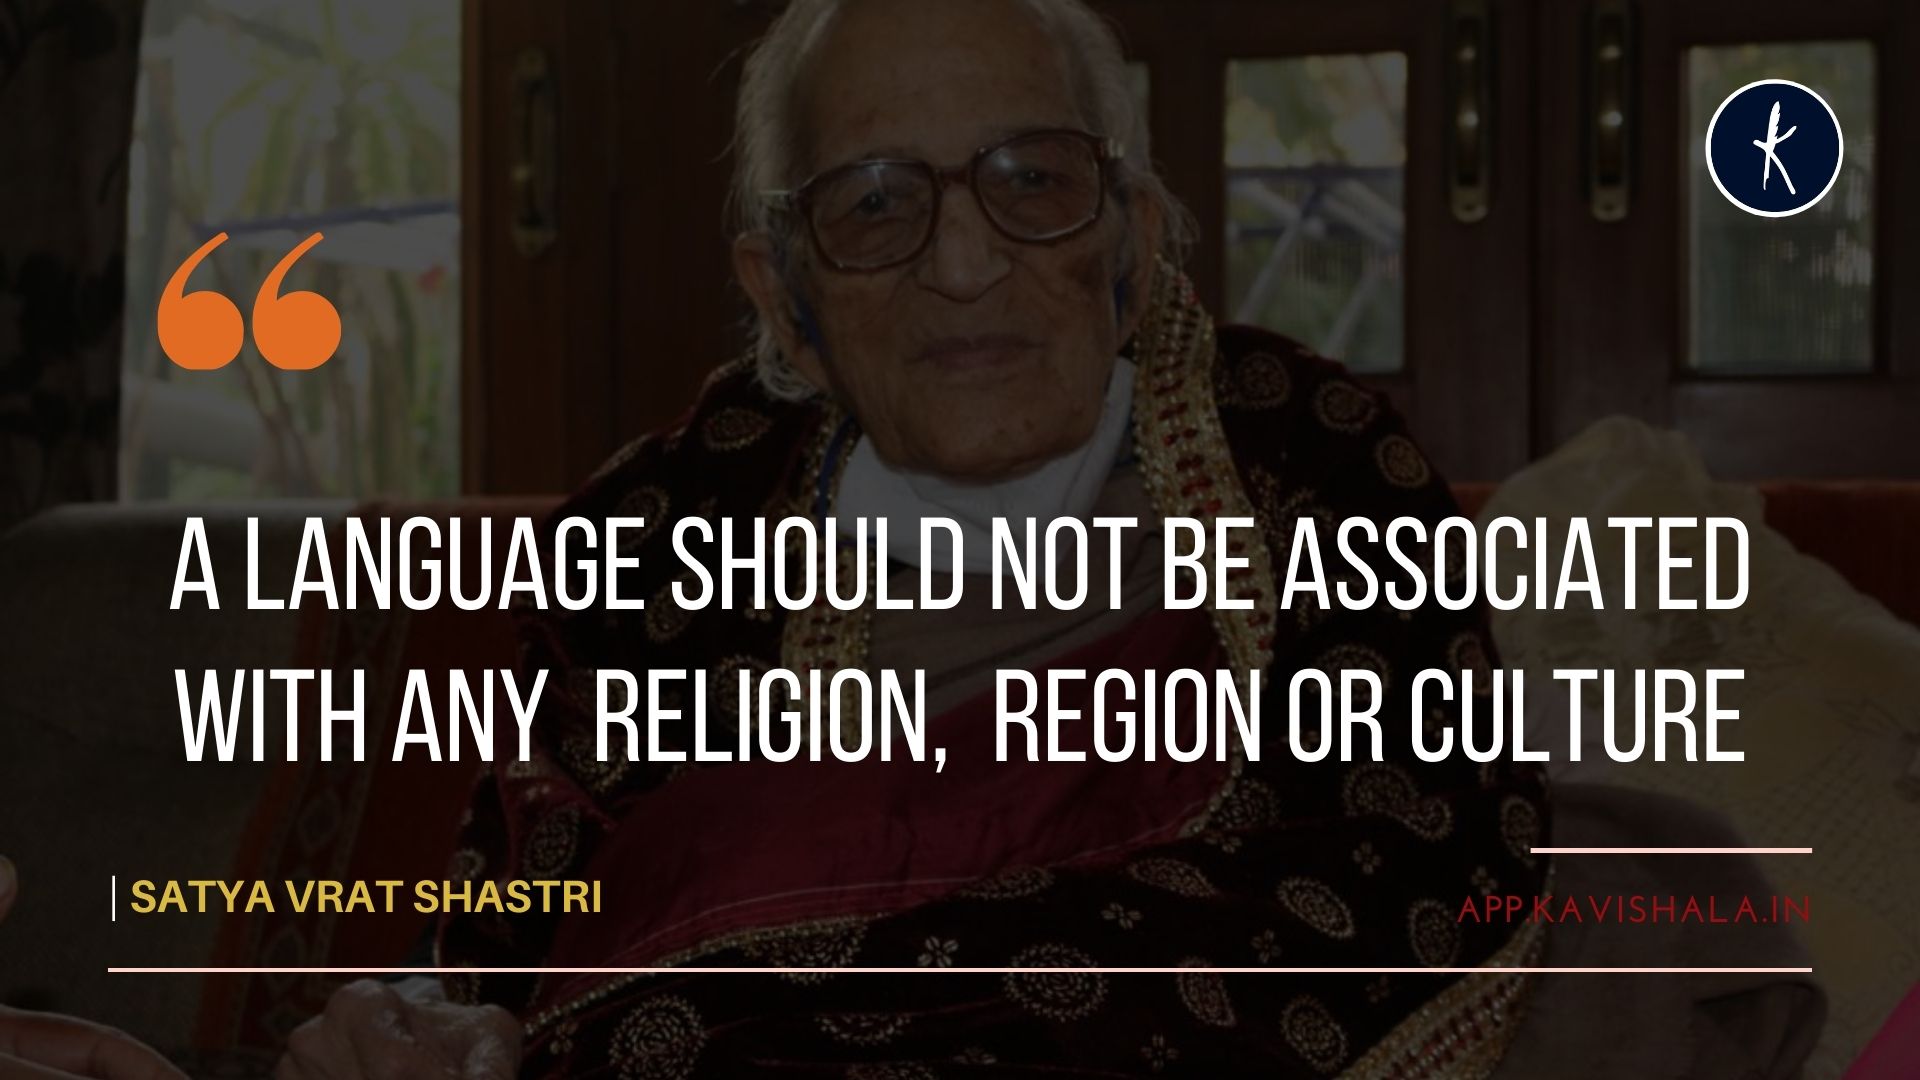 A language should not be associated with any religion, region or culture: Satya Vrat Shastri's image